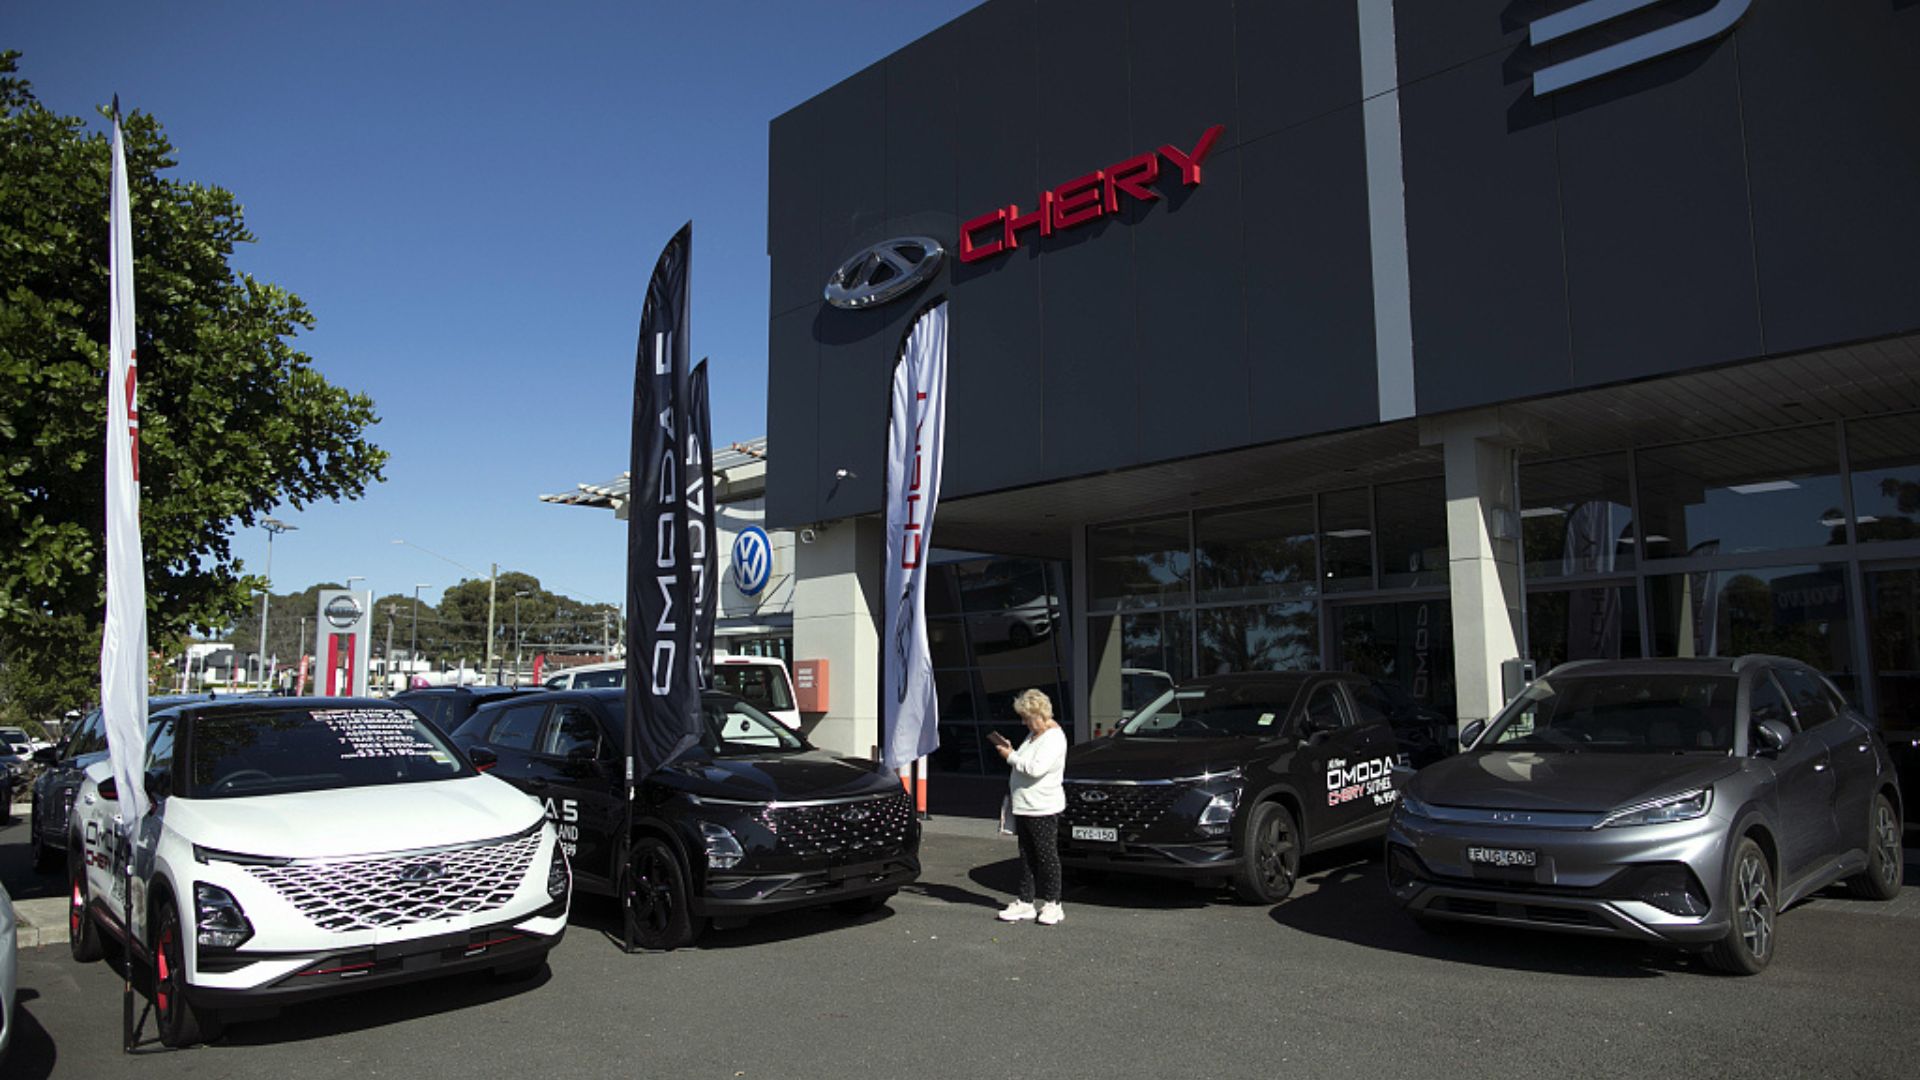 Chery Automobile dealerships like this one in Sydney, Australia could become common in Italy. /Brent Lewin/Bloomberg via Getty Images